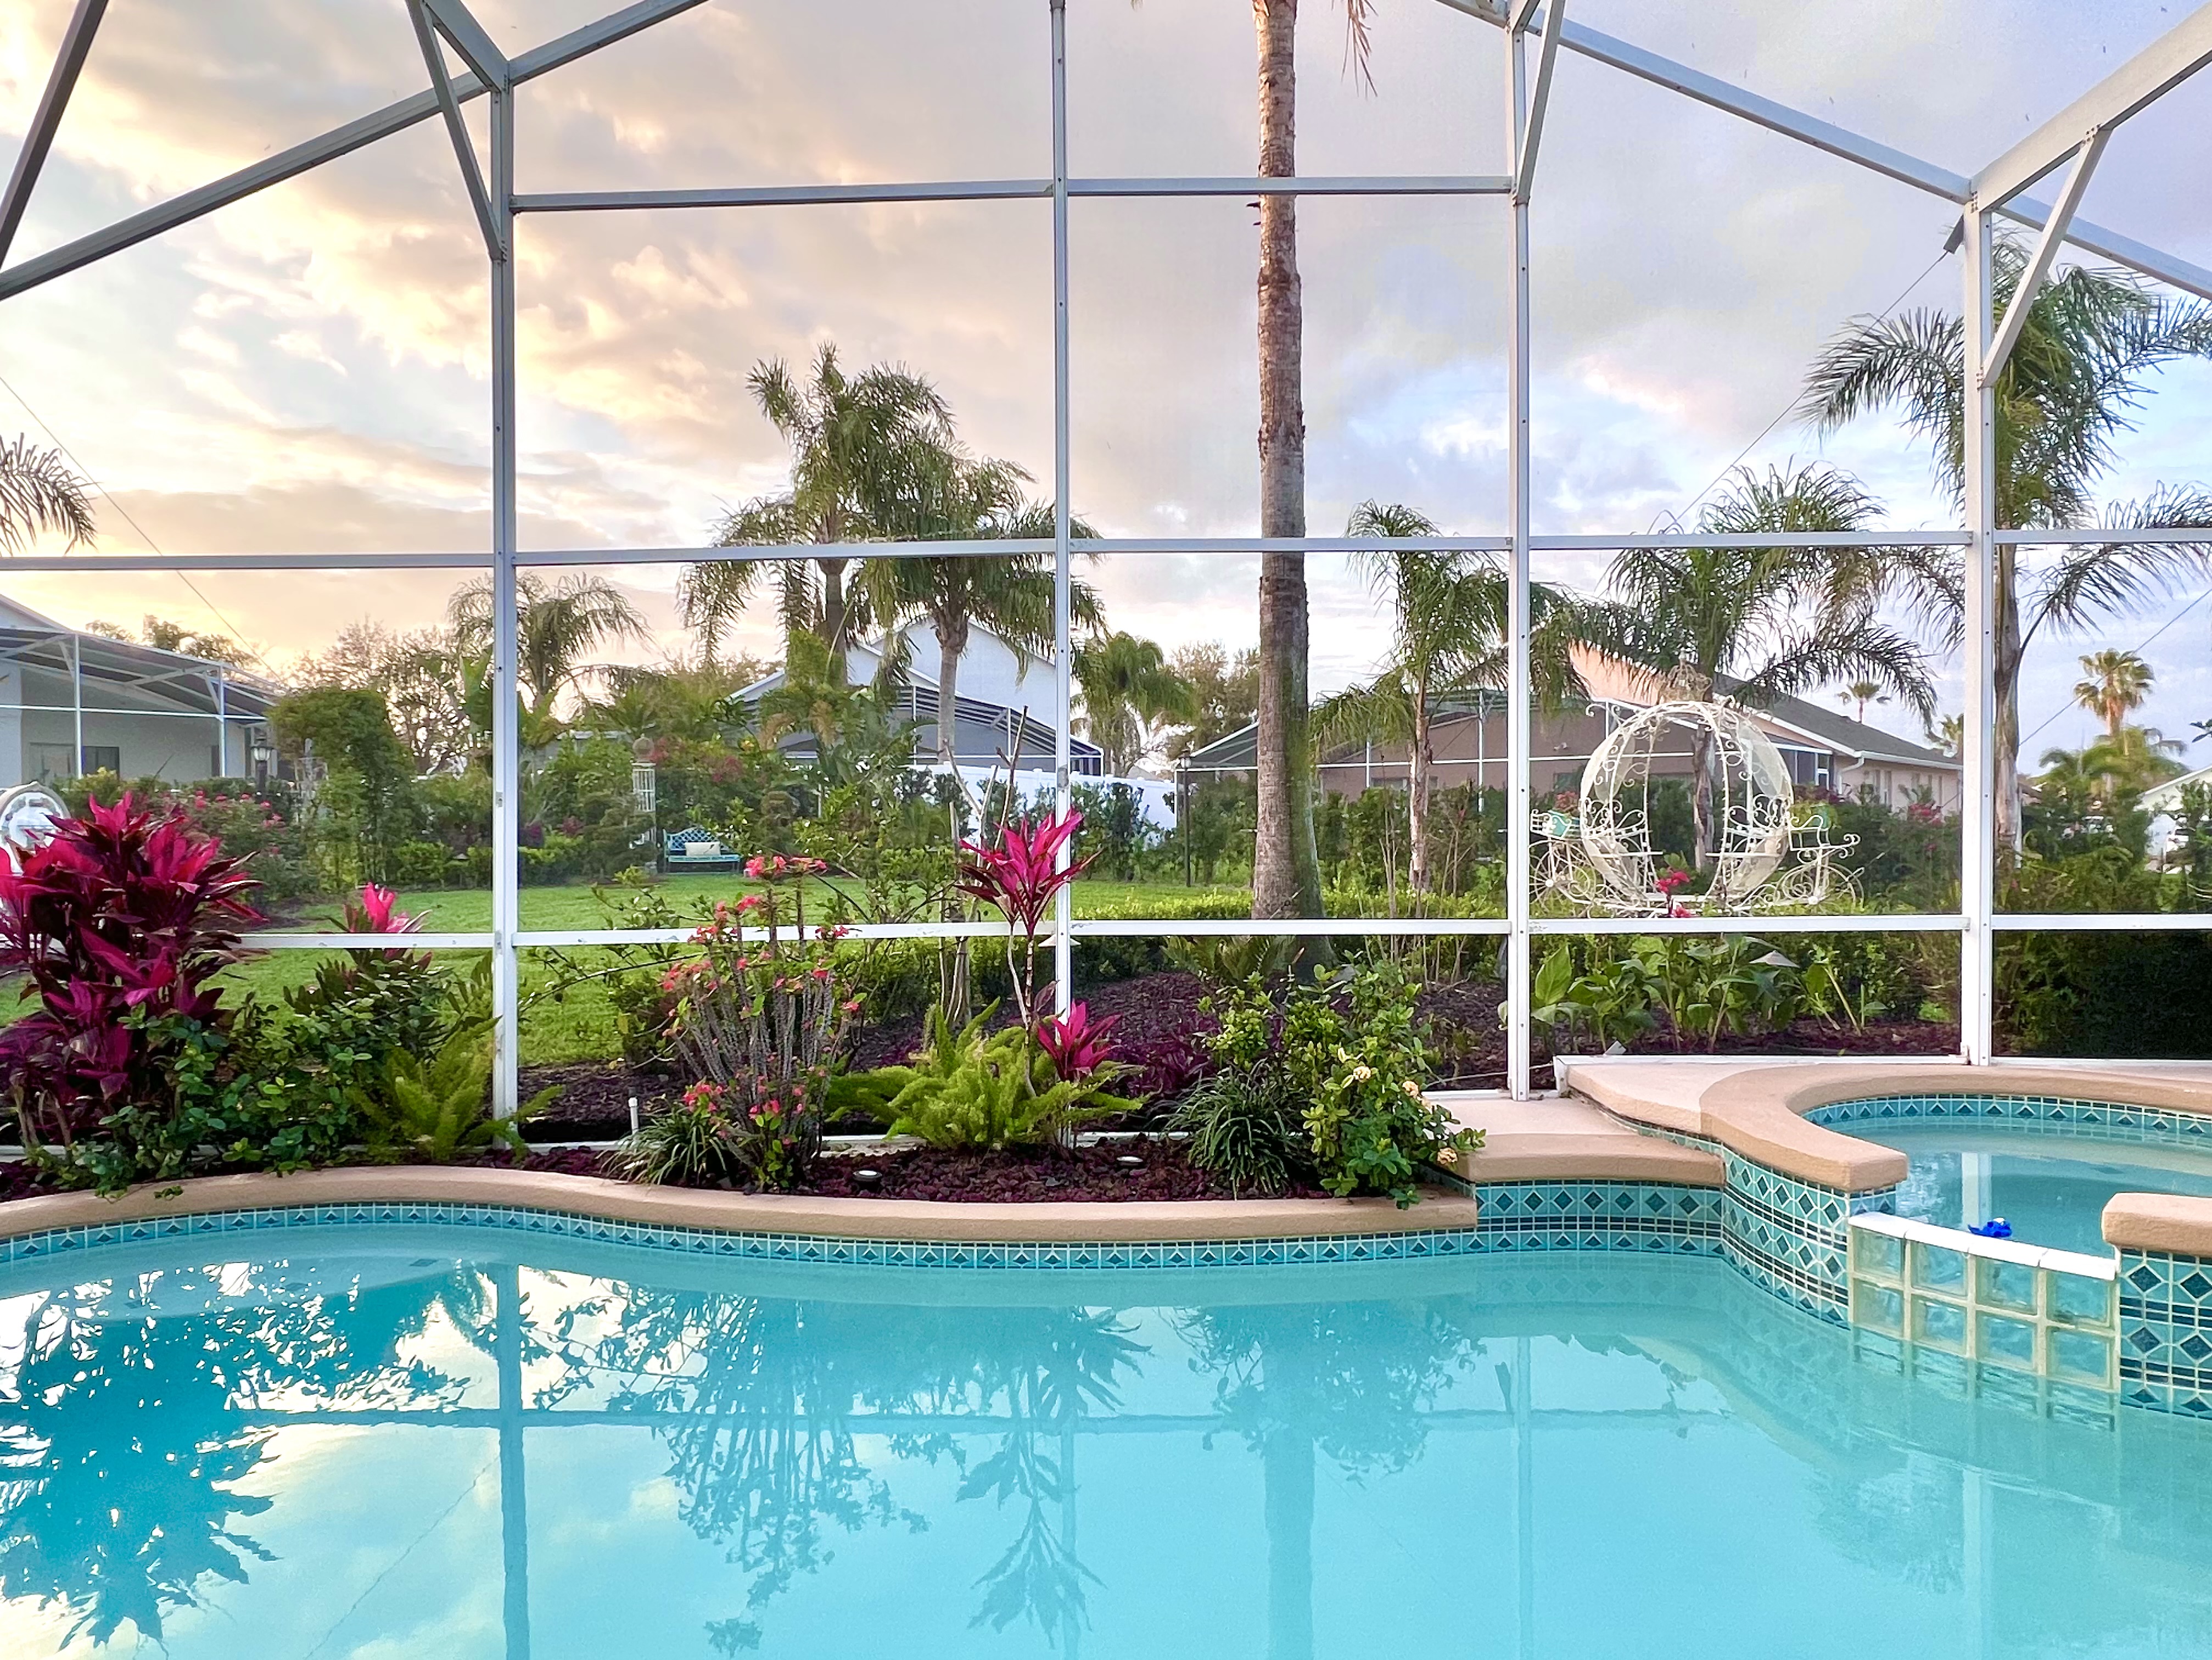 Aqua-blue pool and spa with beautifully manicured tropical flower gardens on a huge, private property is the "Happily Ever After" vacation you deserve, and won't find ANYWHERE else in a moderately-priced rental!!!